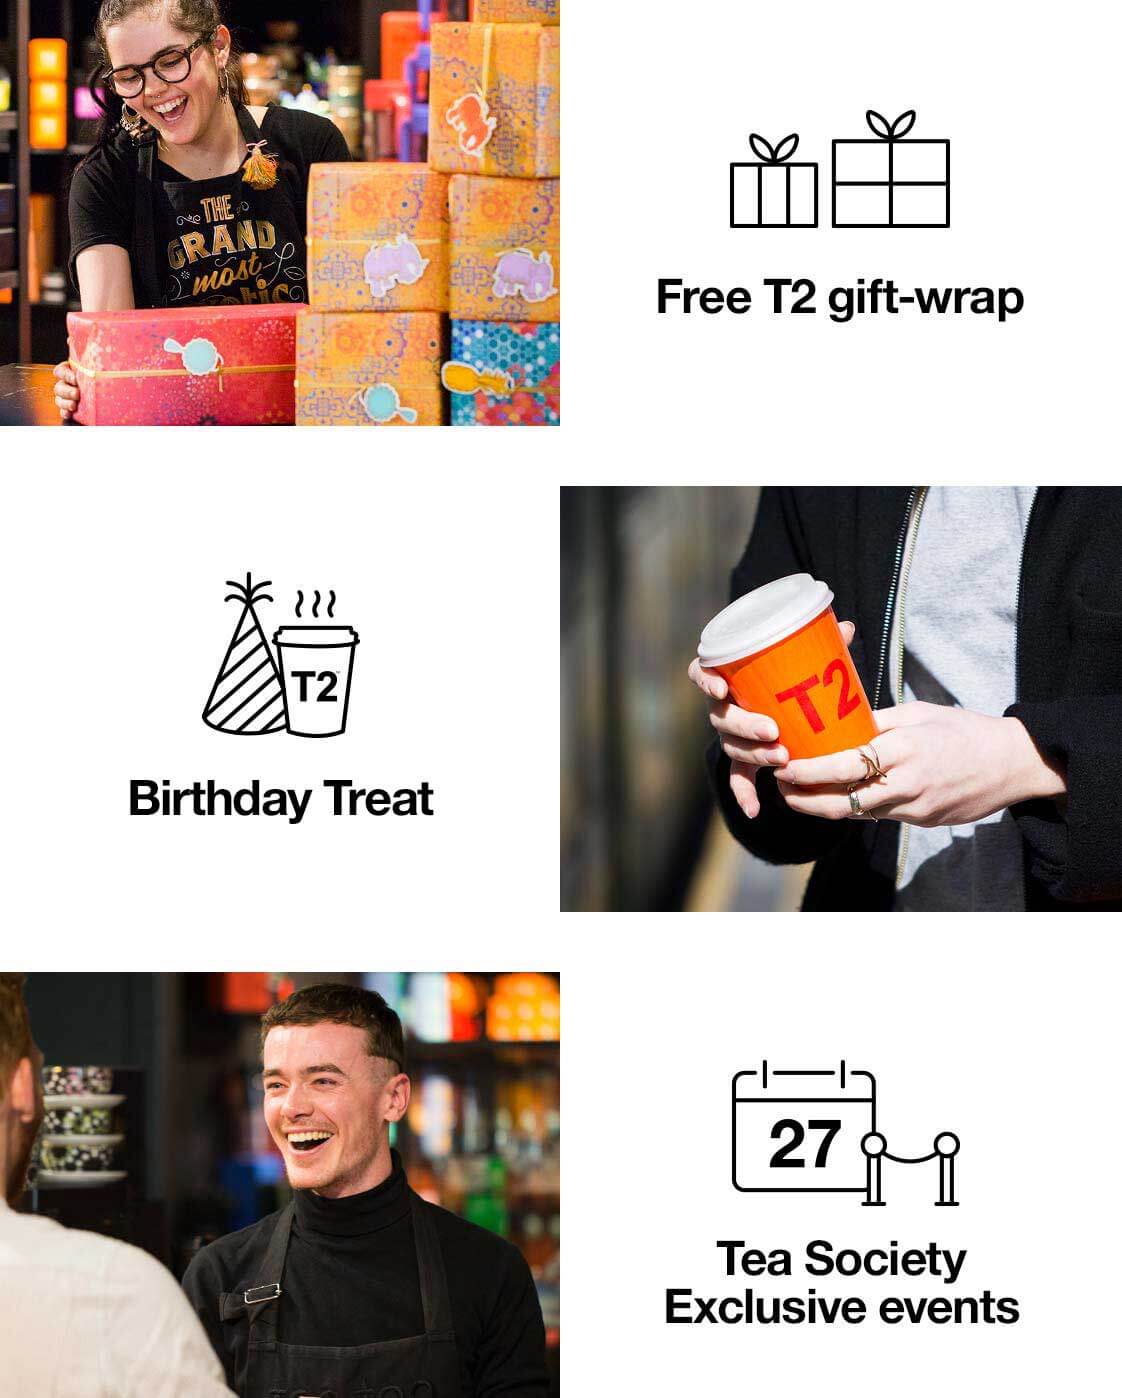 Free T2 gift-wrap. Birthday brew. Tea Society Exclusive events.